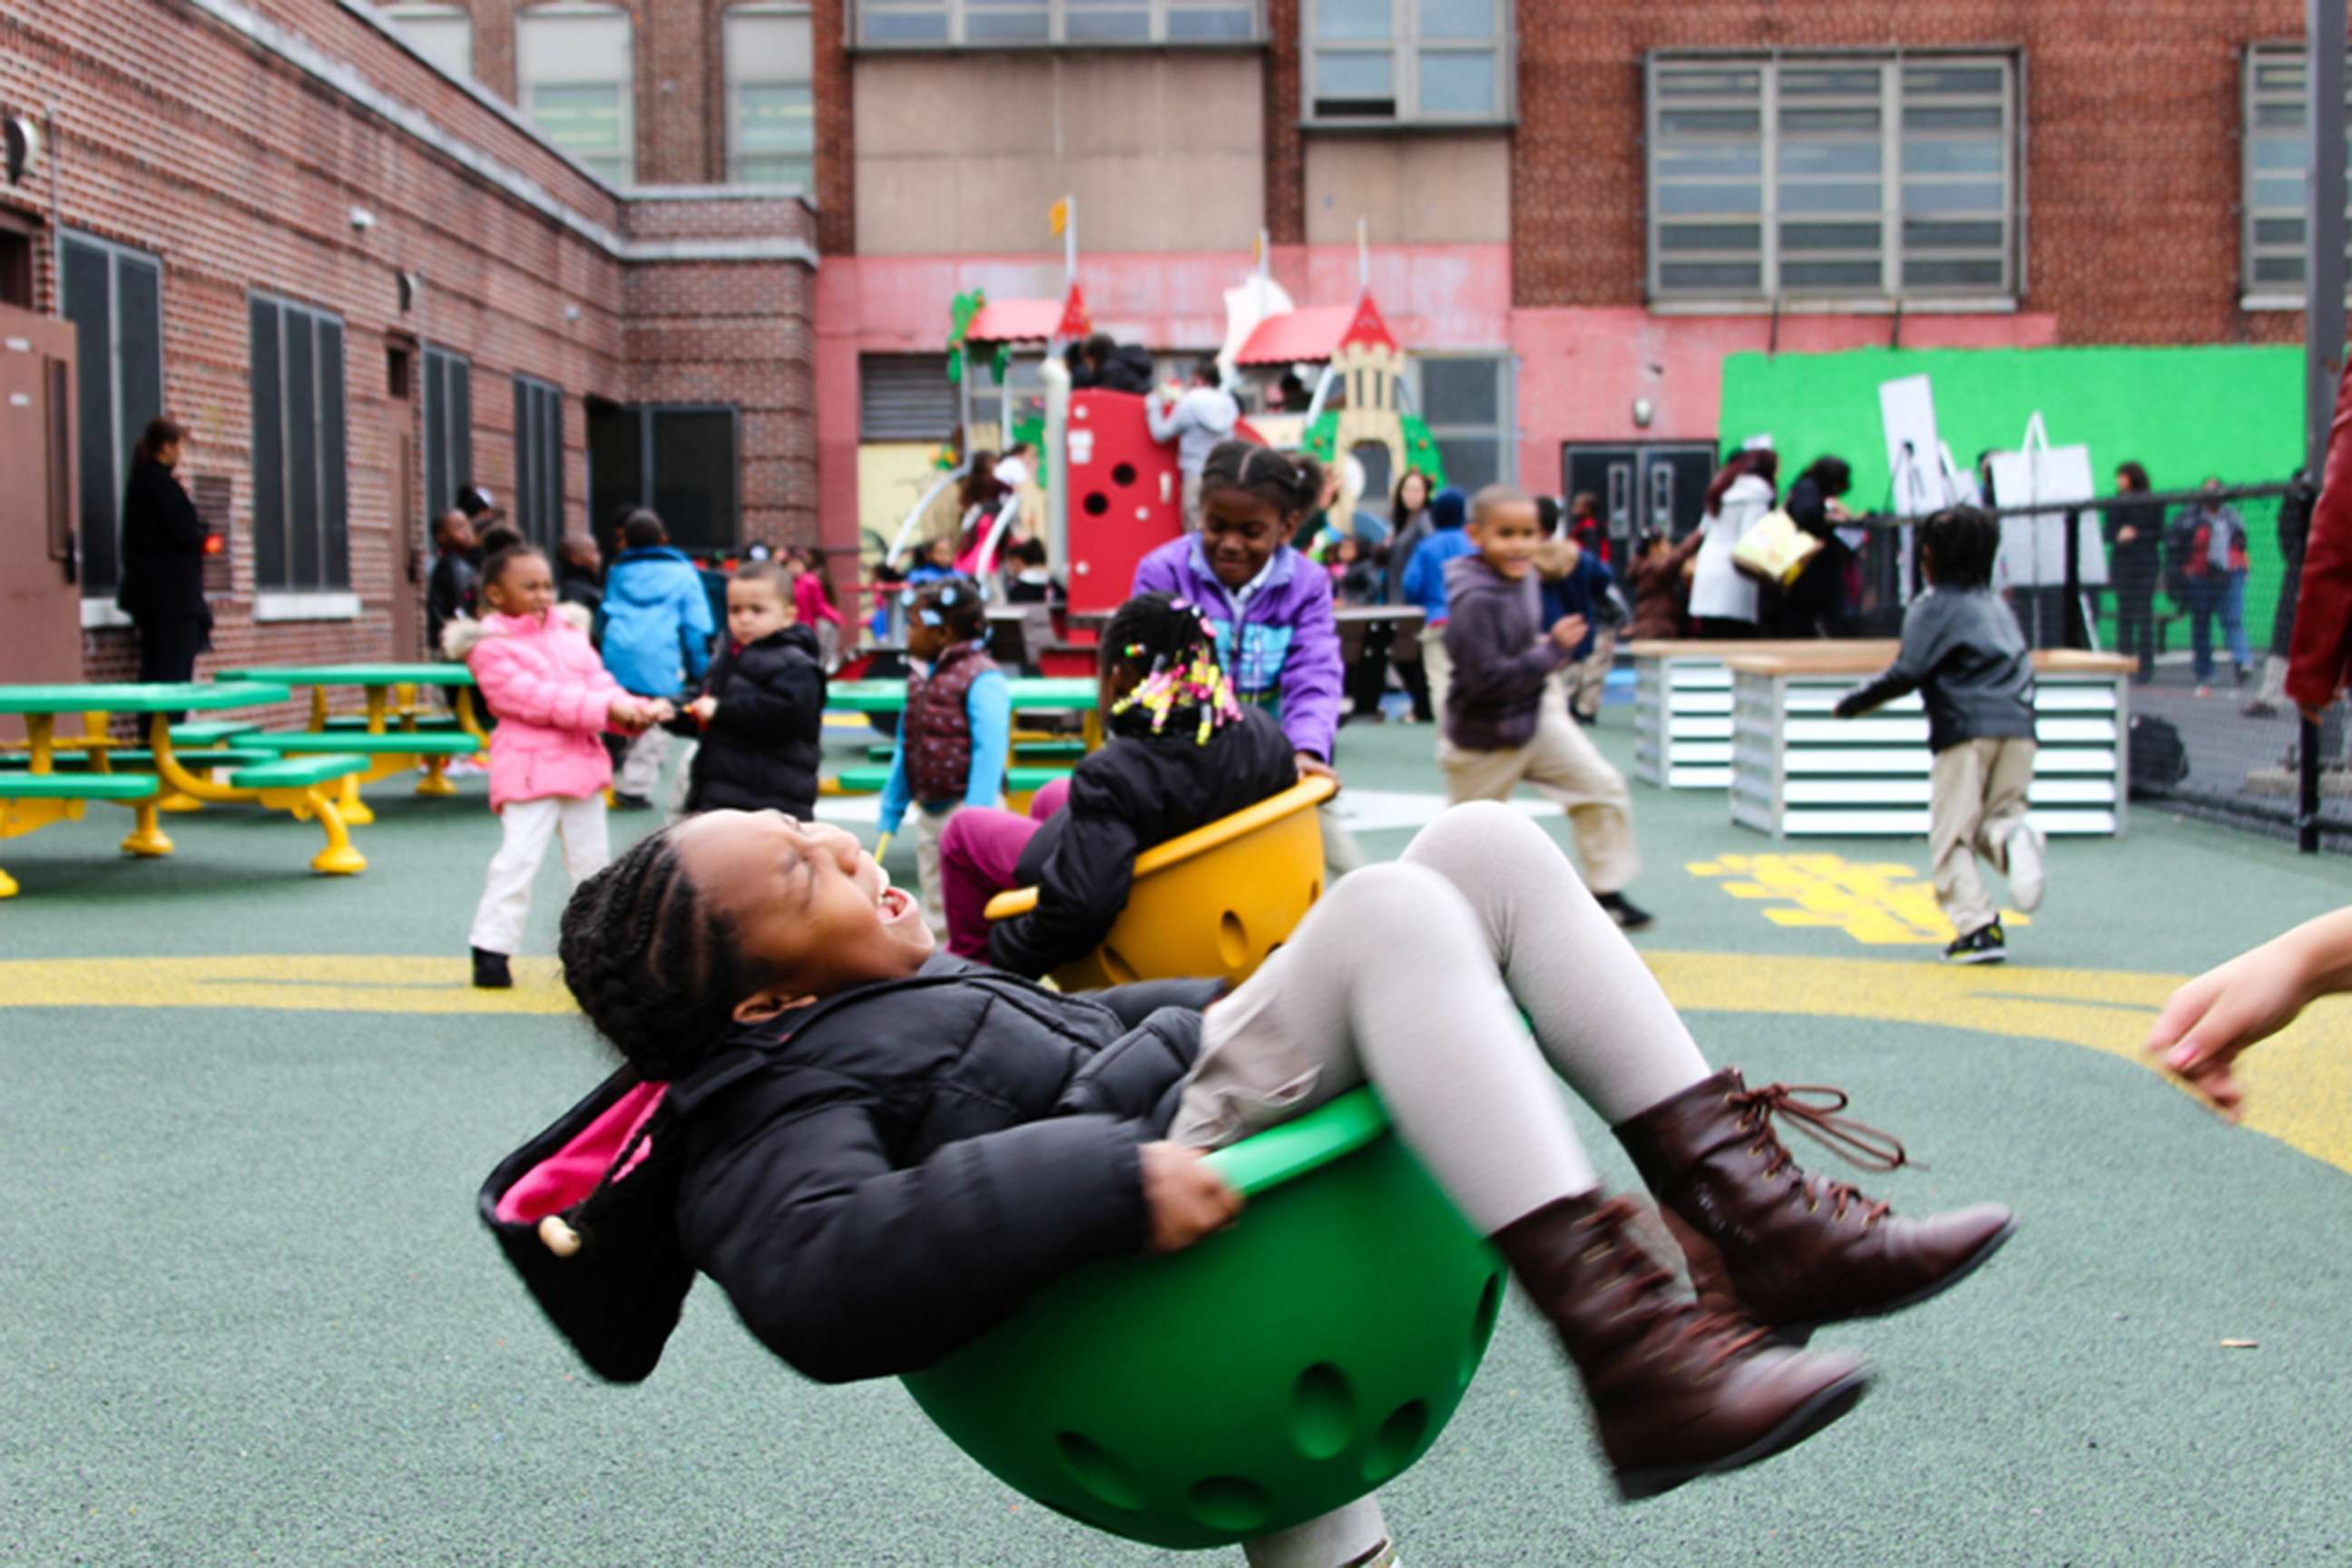 PHOTO: The grand opening of the Sussex Avenue Elementary School playground in Newark, N.J., on Nov. 25, 2014.